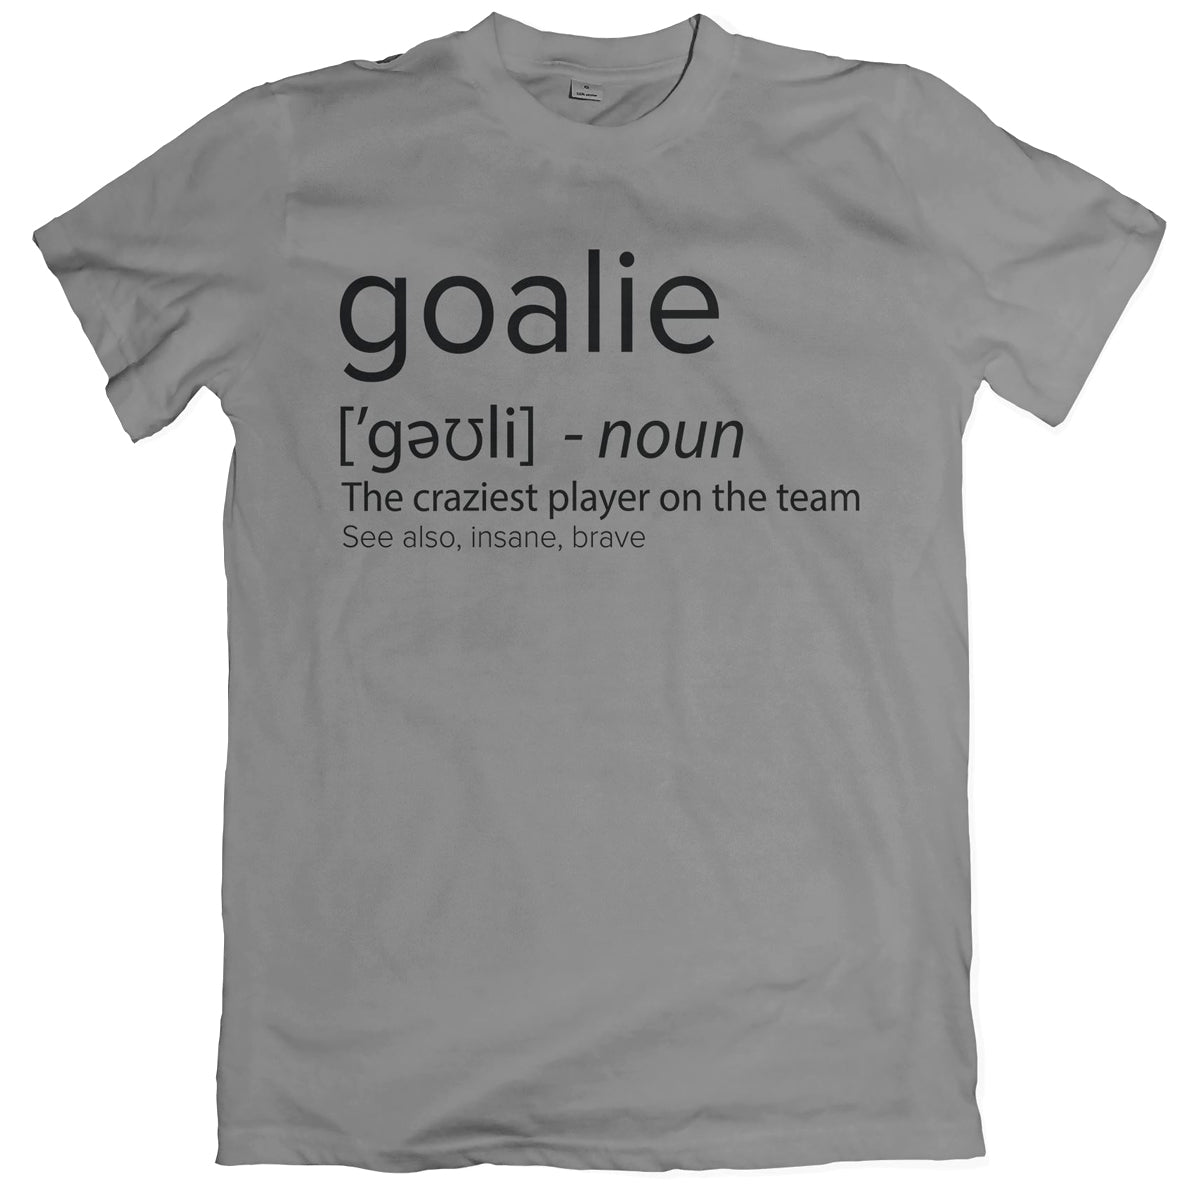 Goalie Definition T-Shirt Shirts 411 Youth Small Grey 